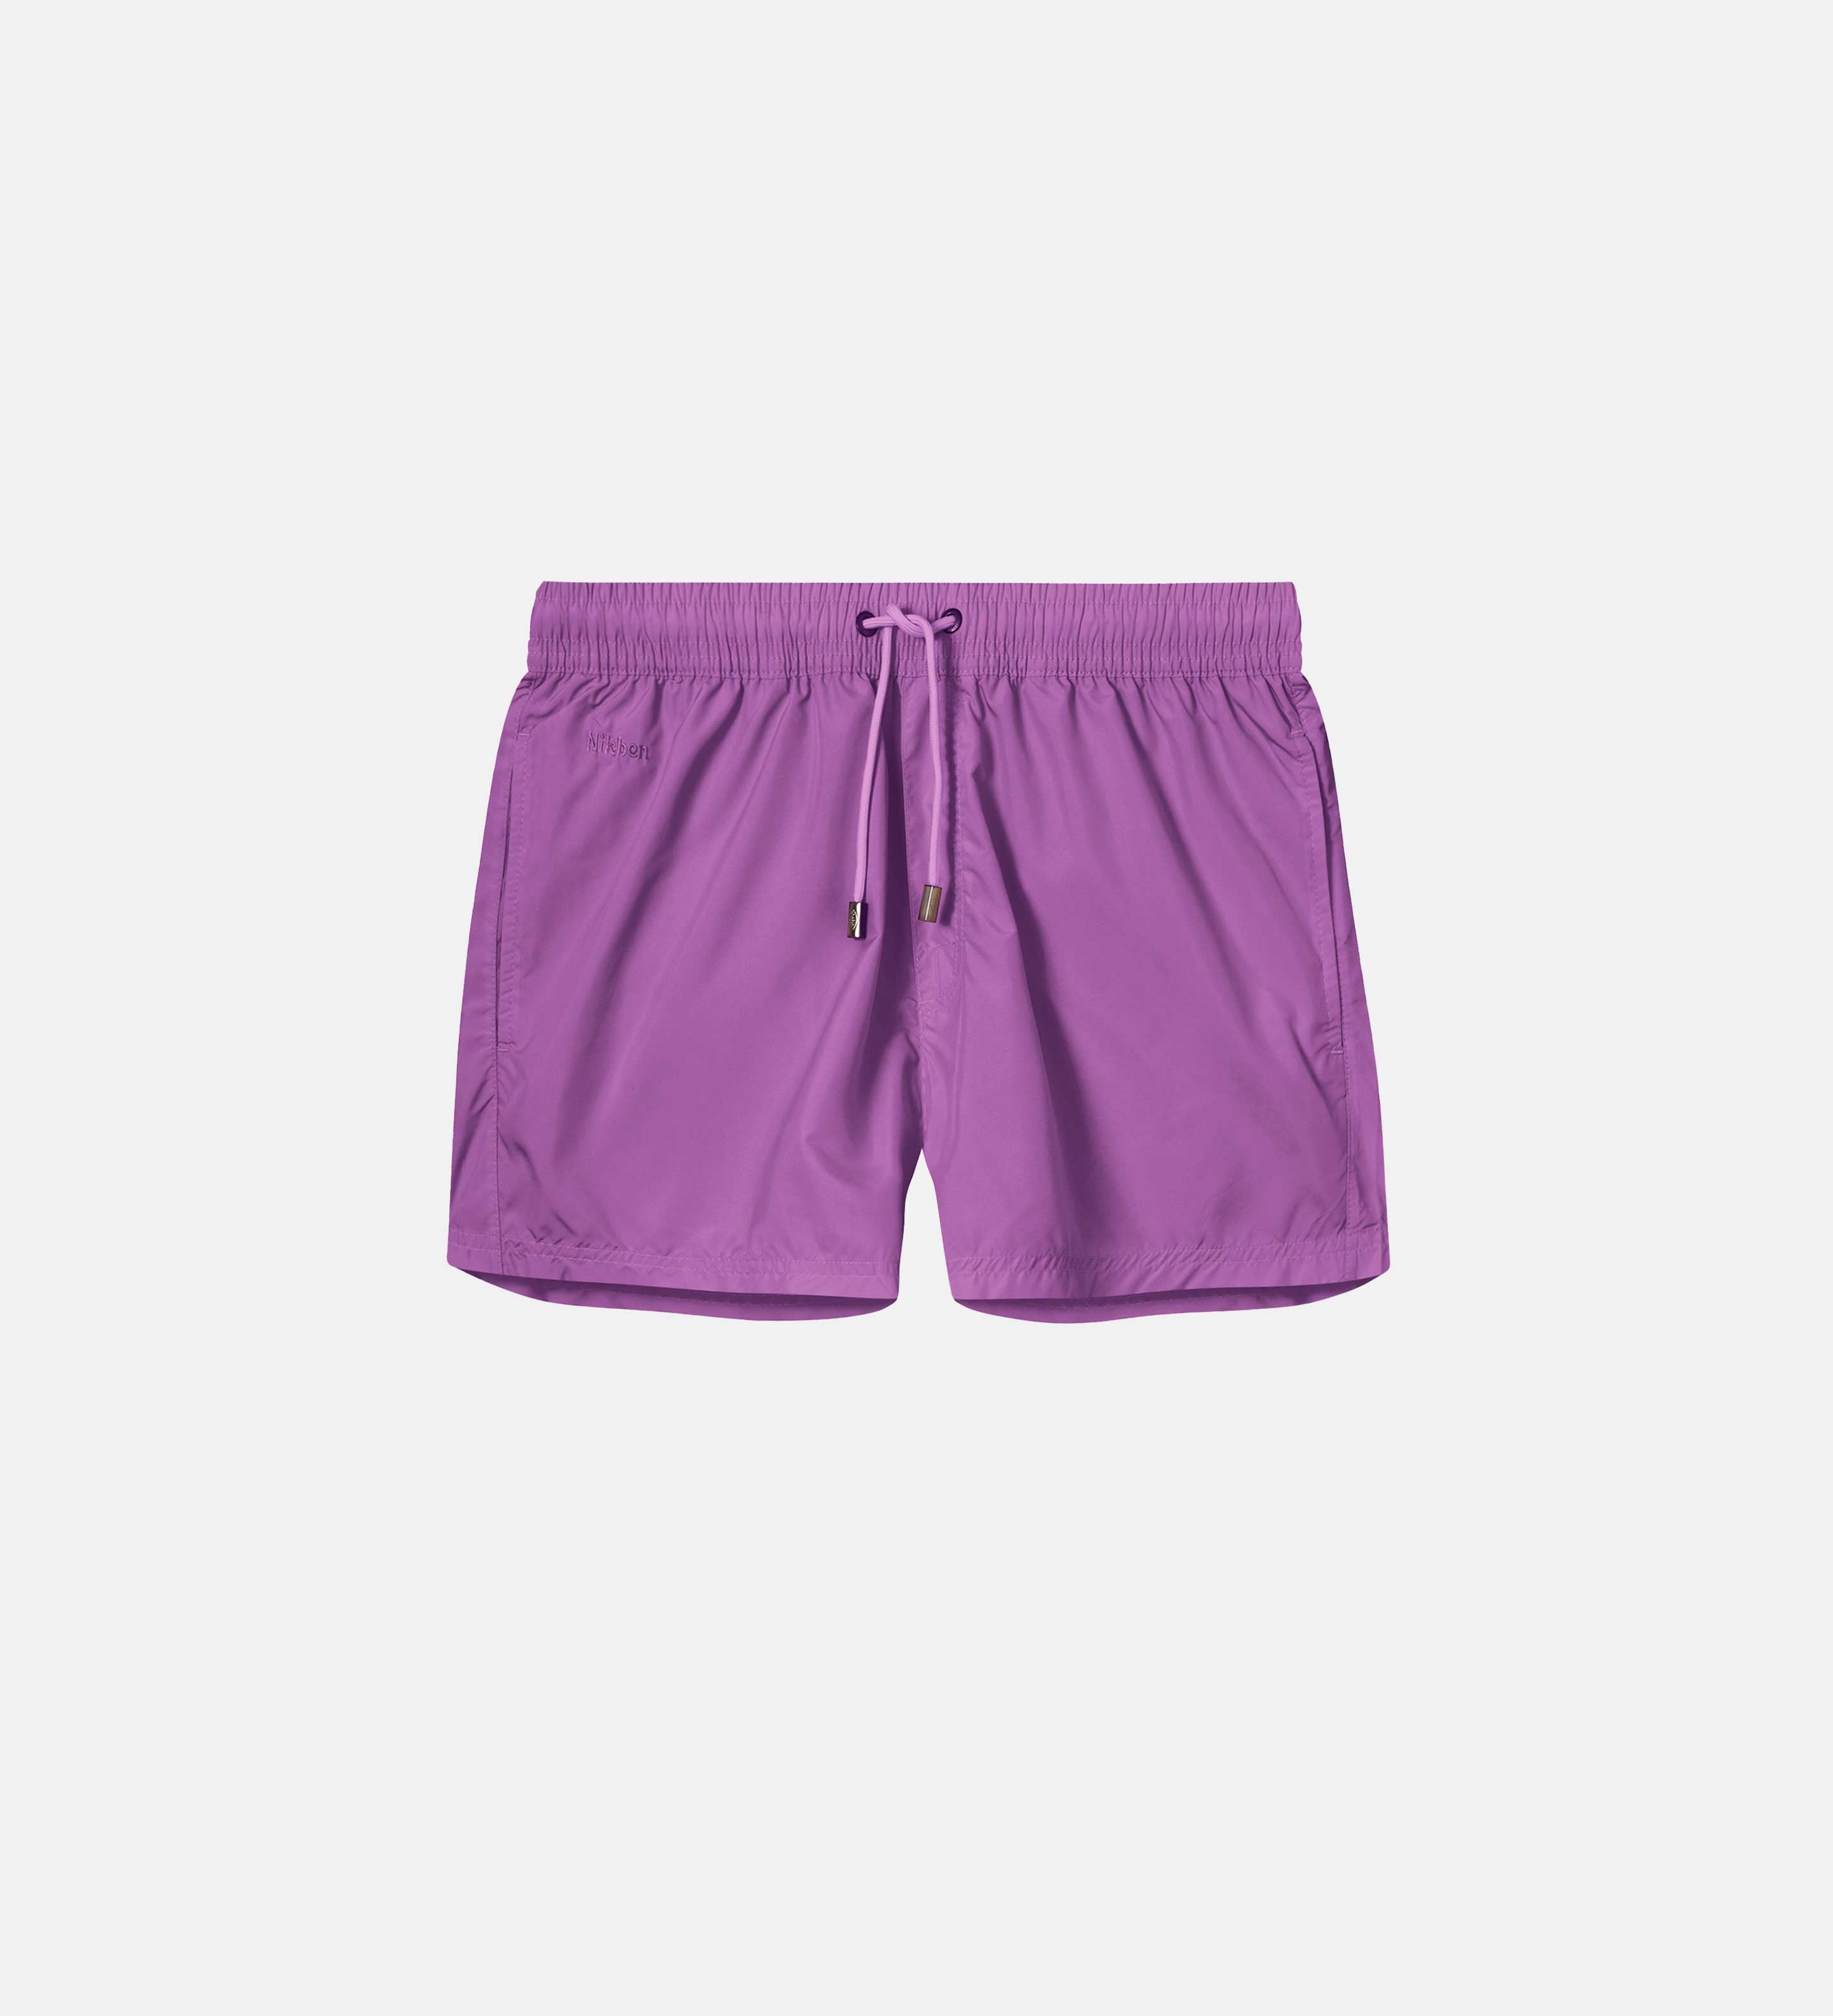 Purple swim trunks. Mid length with drawstring and two side pockets.